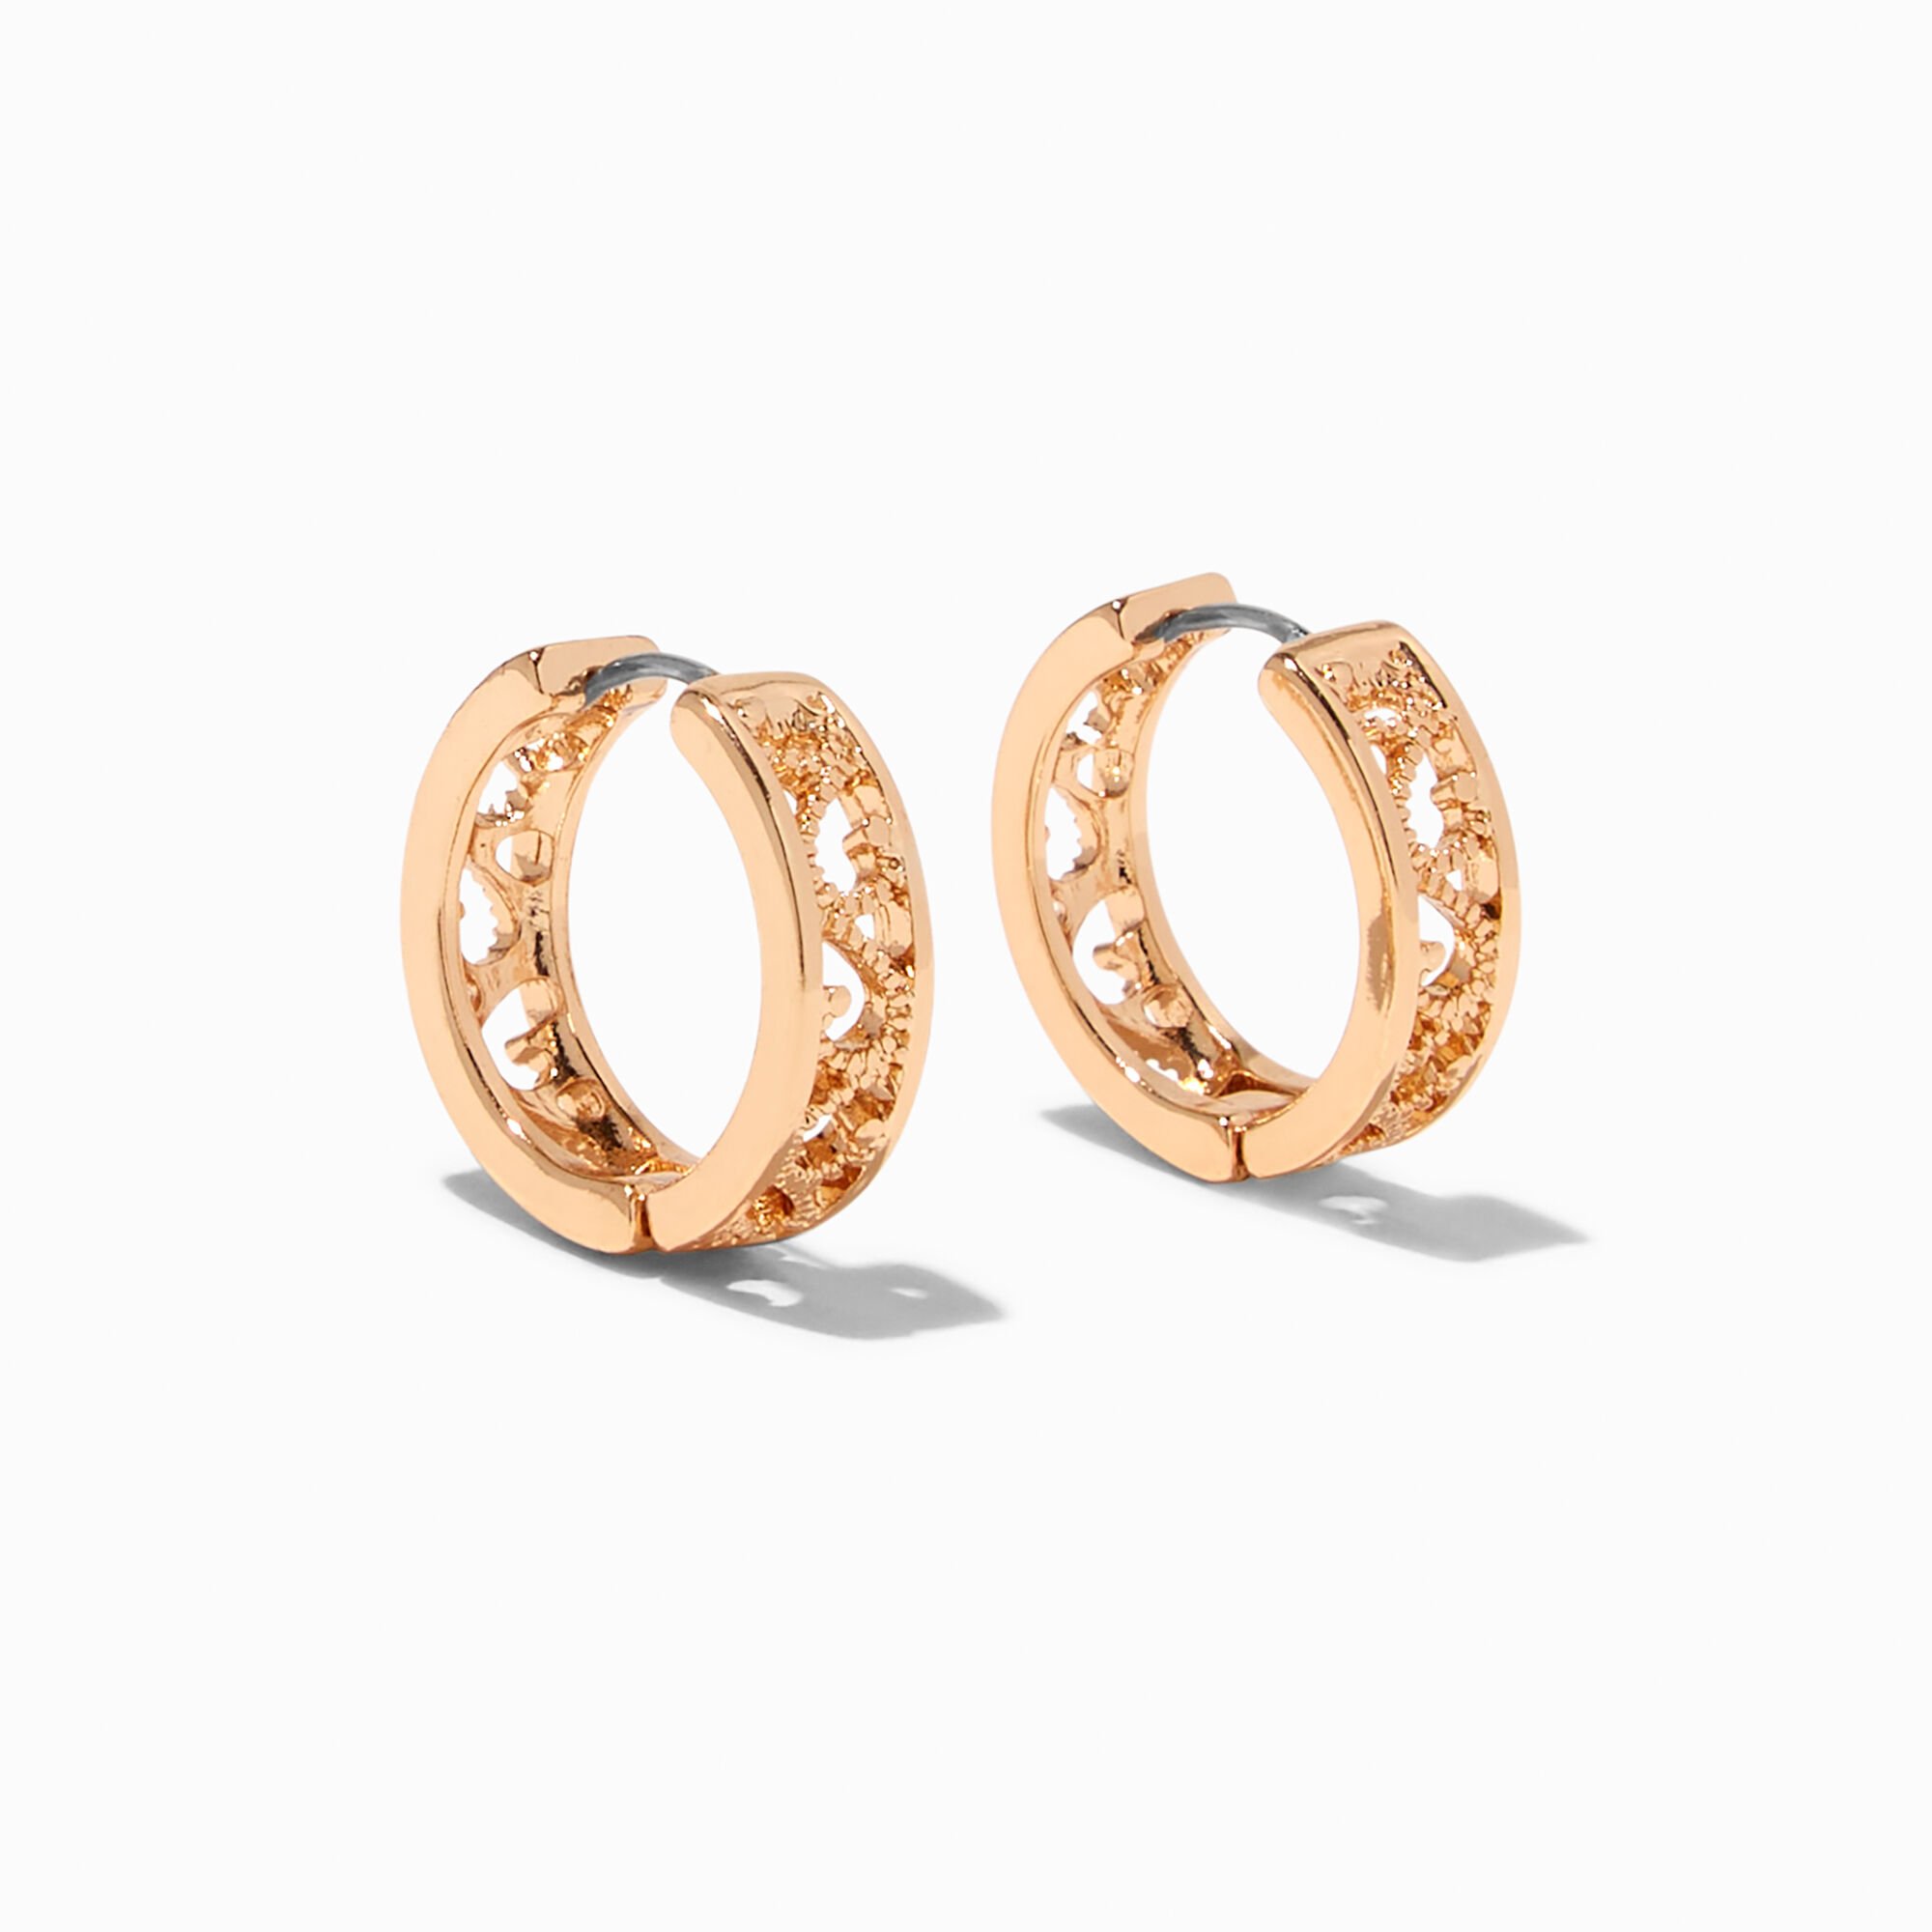 View Claires 20MM Filigree Clicker Hoop Earrings Gold information